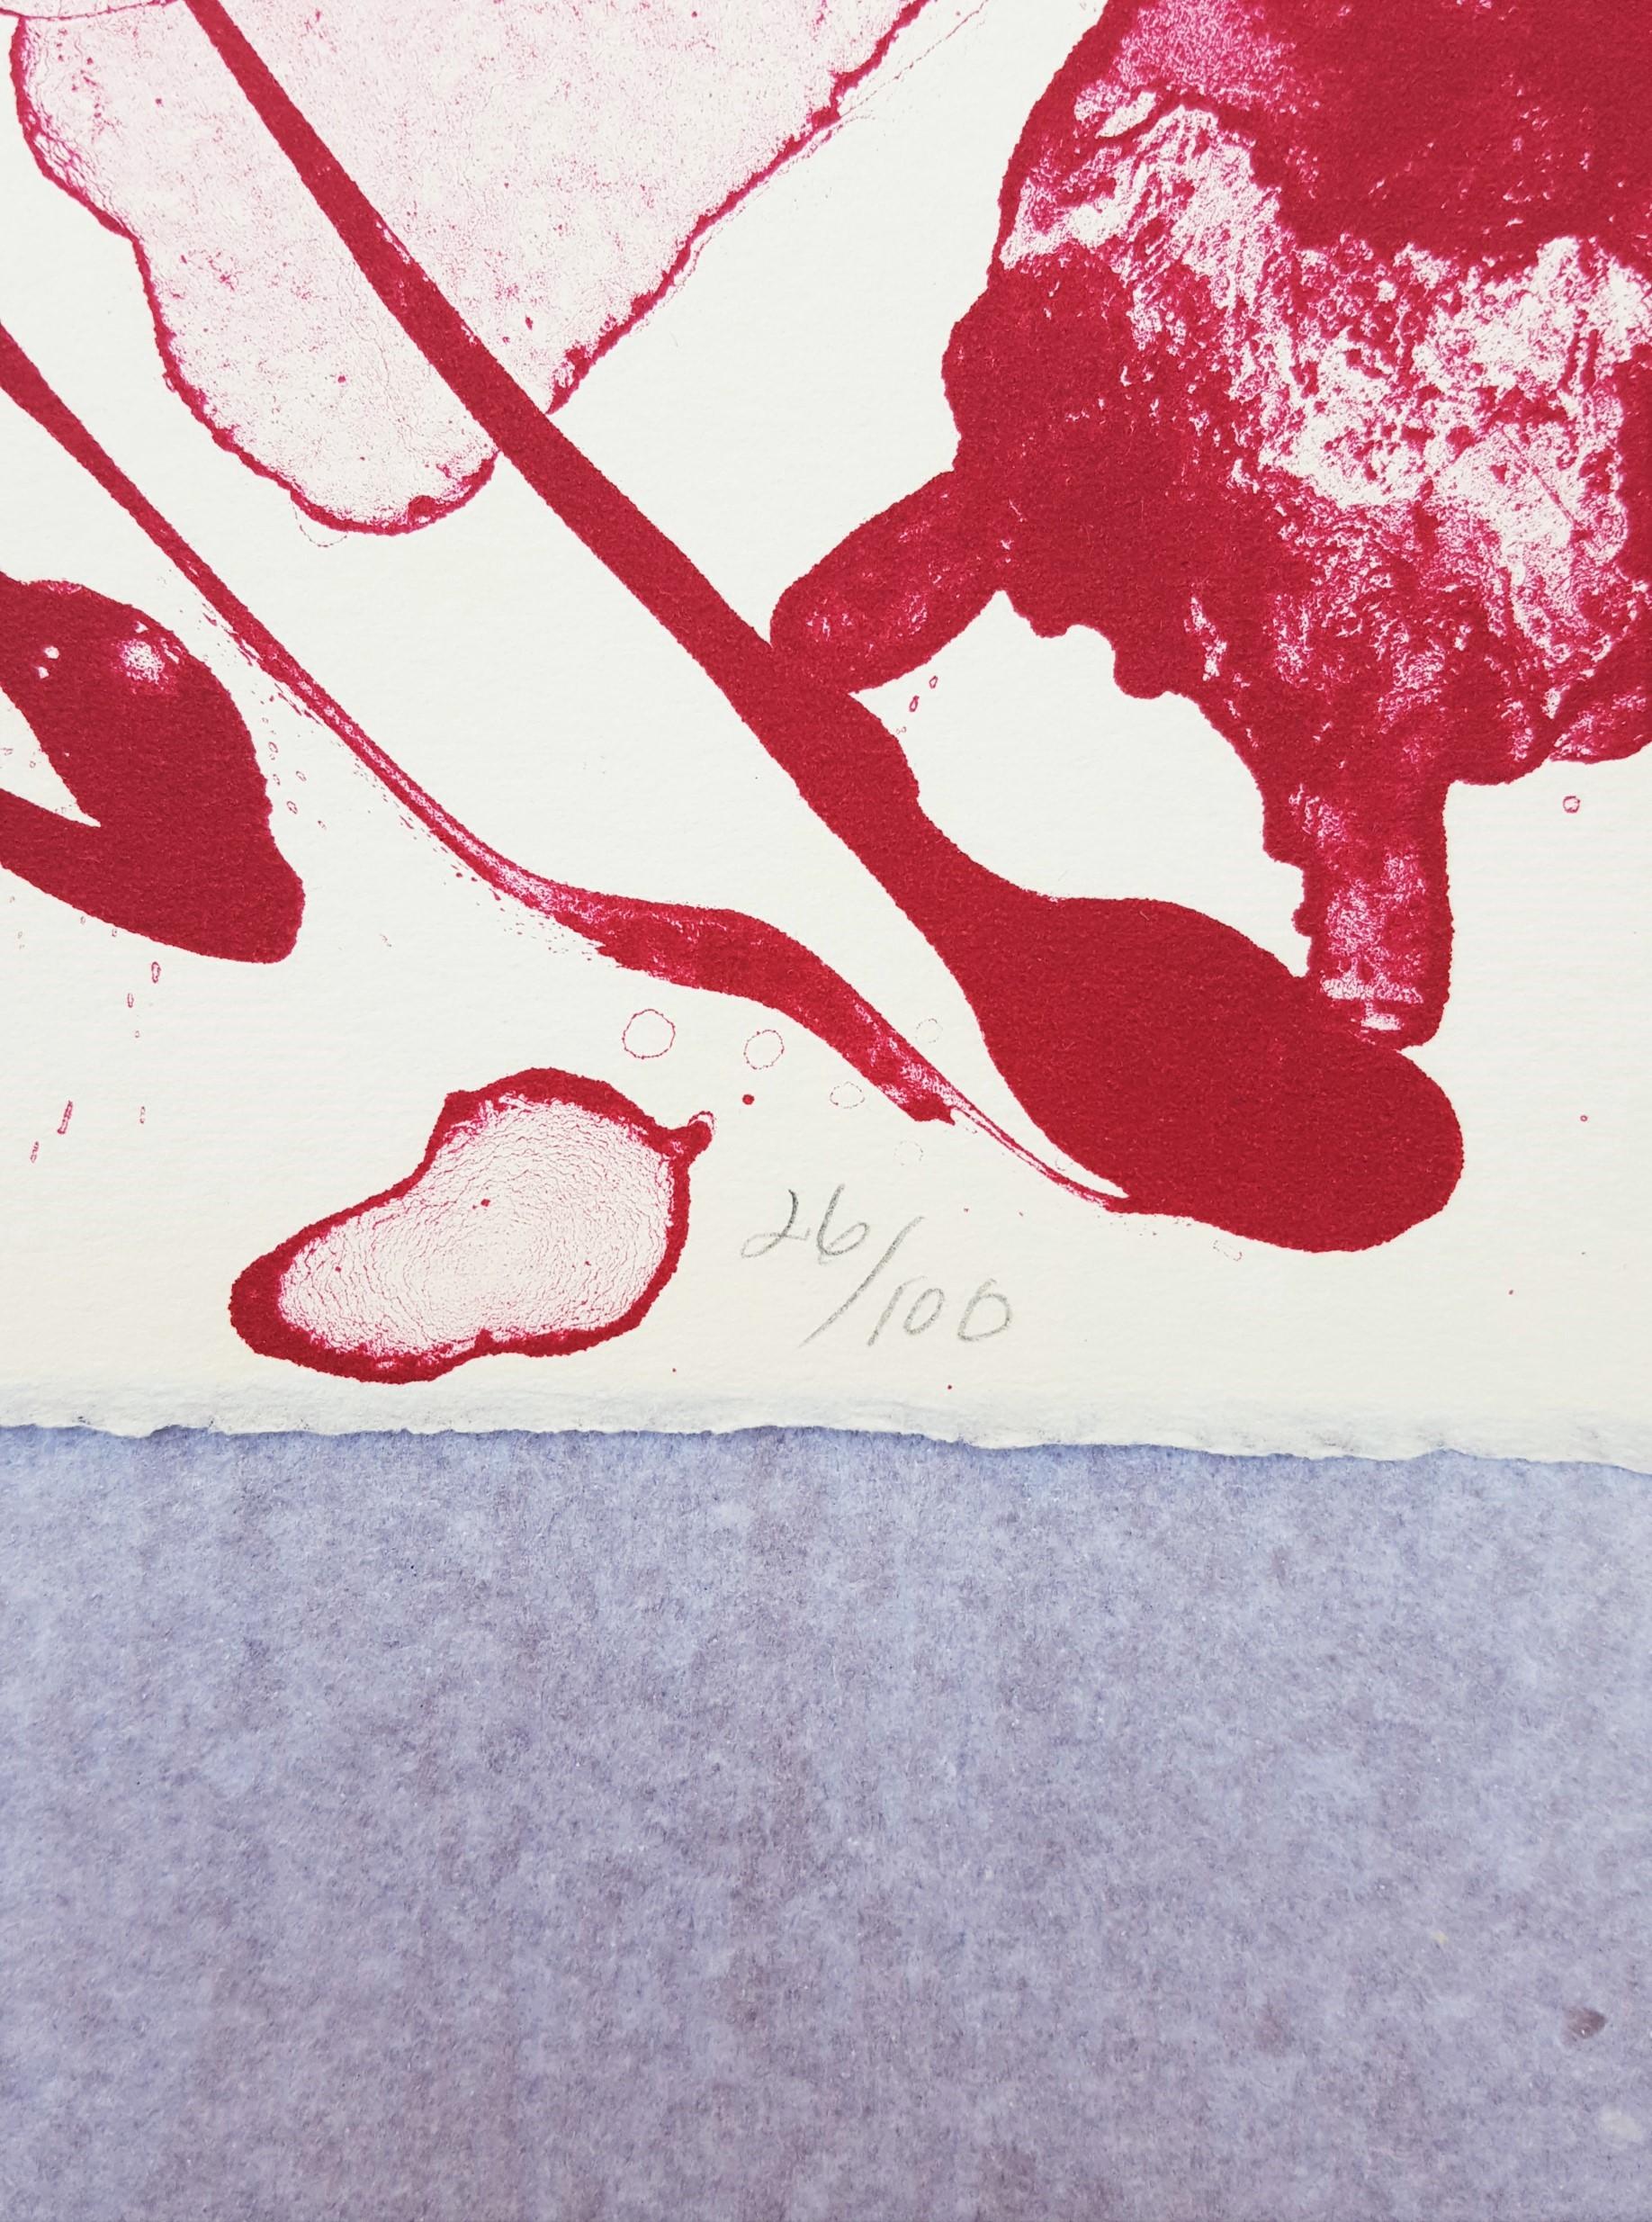 An original signed lithograph on Arches paper by American artist Lee Krasner (1908-1984) titled 